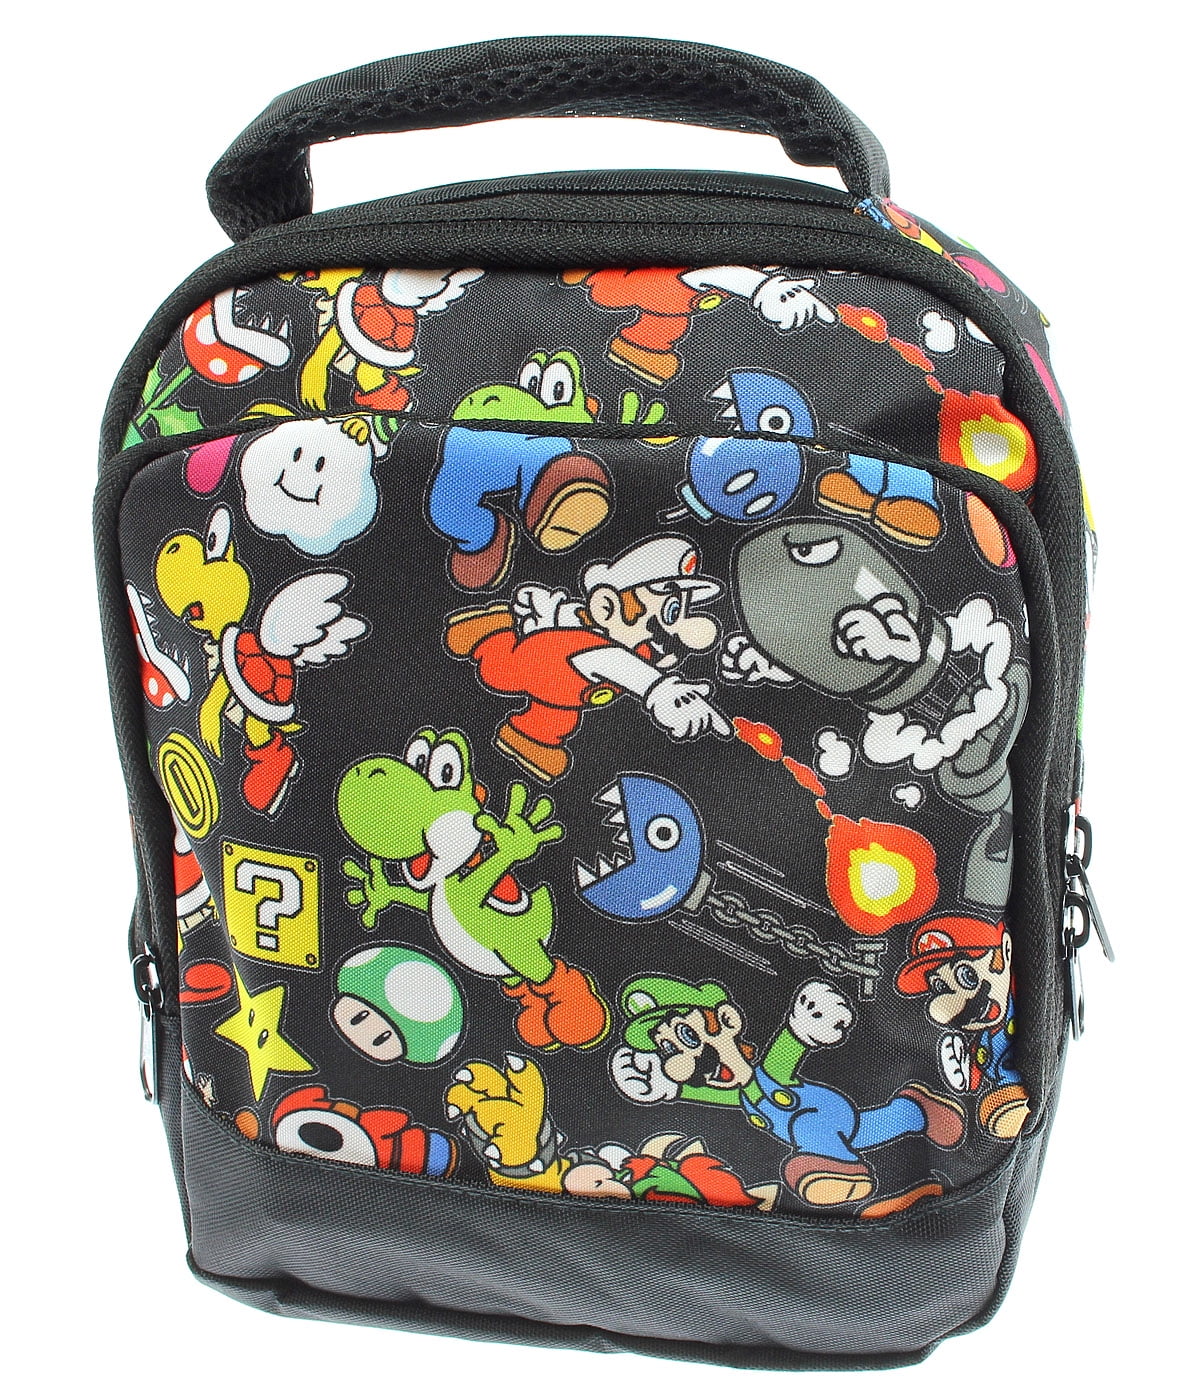 New Super Mario Lunch Bag with long strap 100% Brand new 